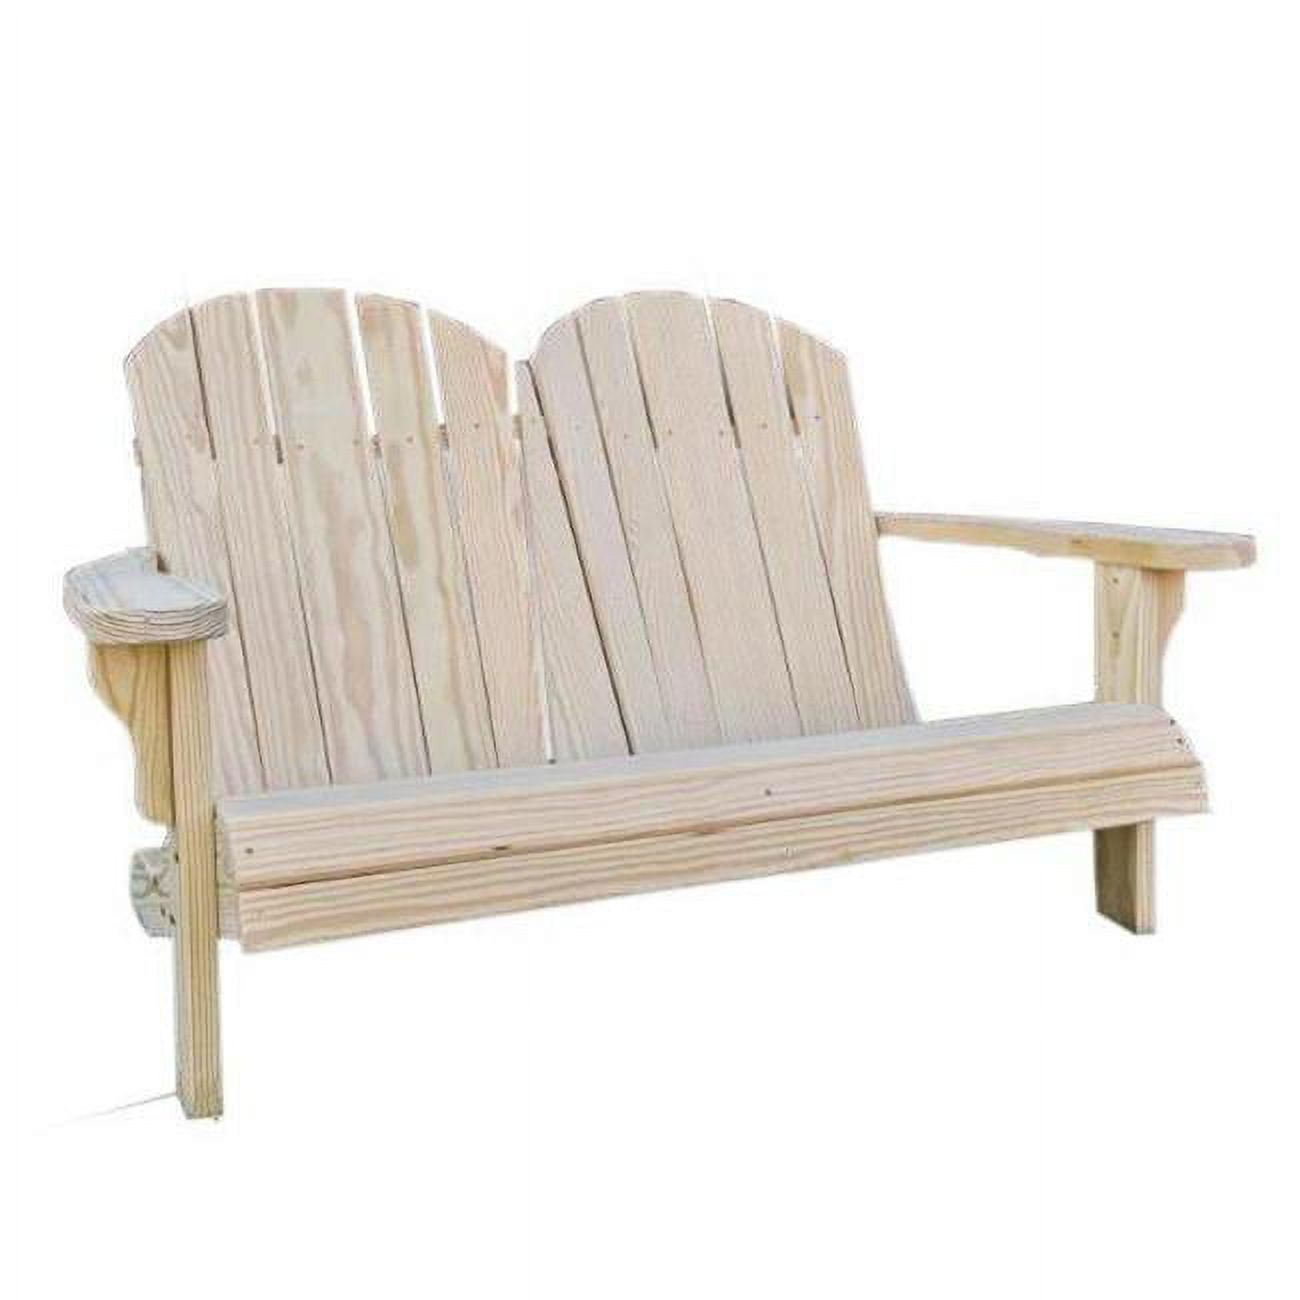 Fpb48adcvd 53 In. Treated Pine Low Curveback Garden Bench